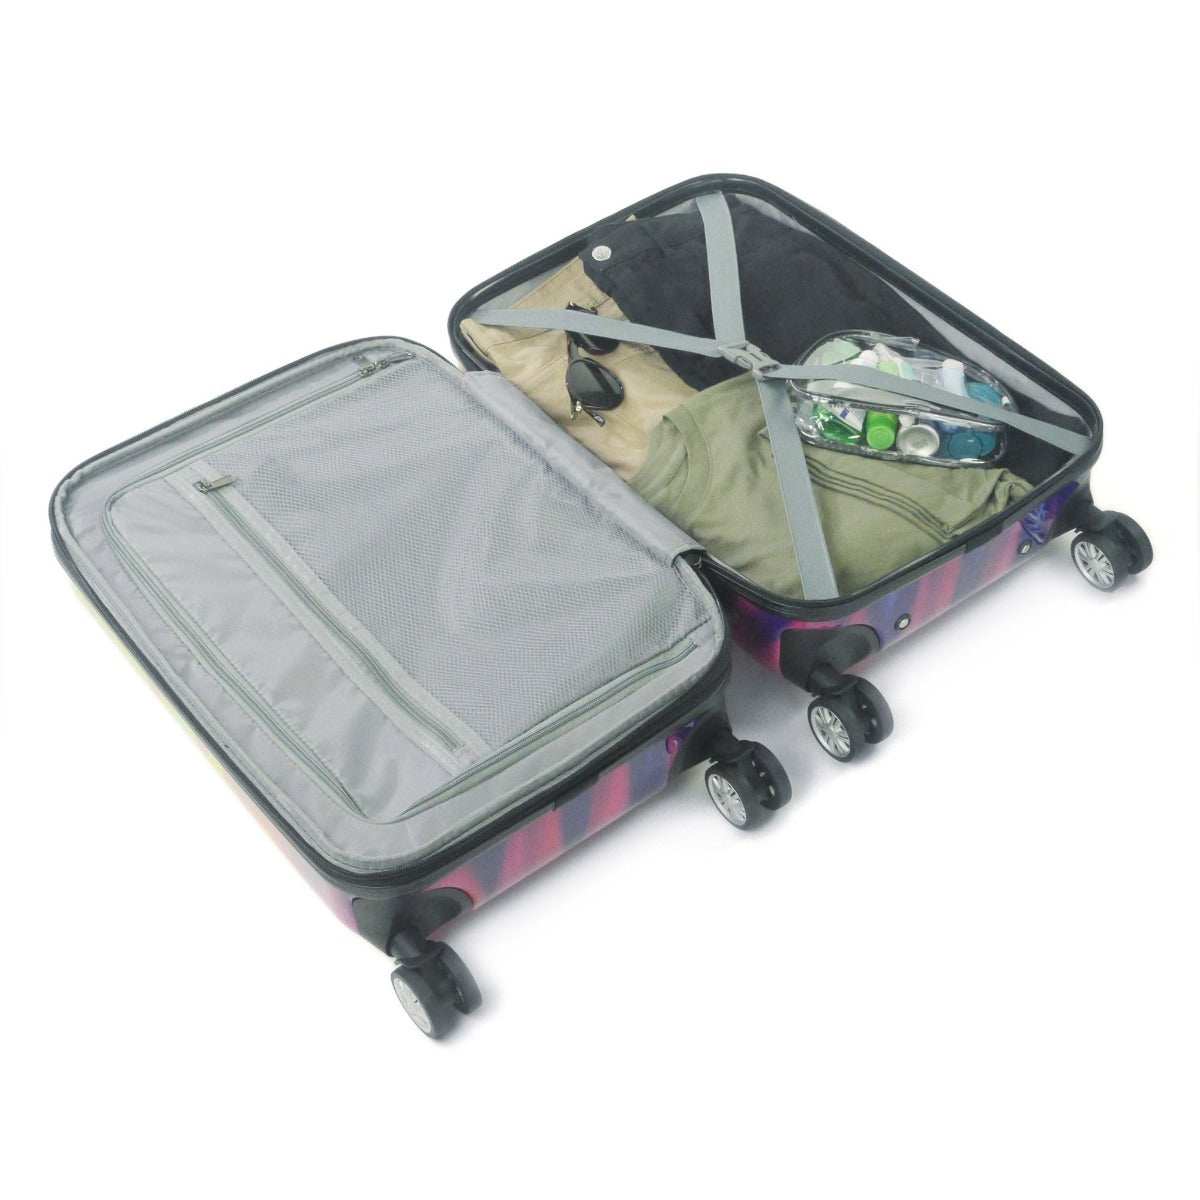 Ful Hard sided Tie dye rainbow swirl 28" spinner rolling suitcase checked luggage interior